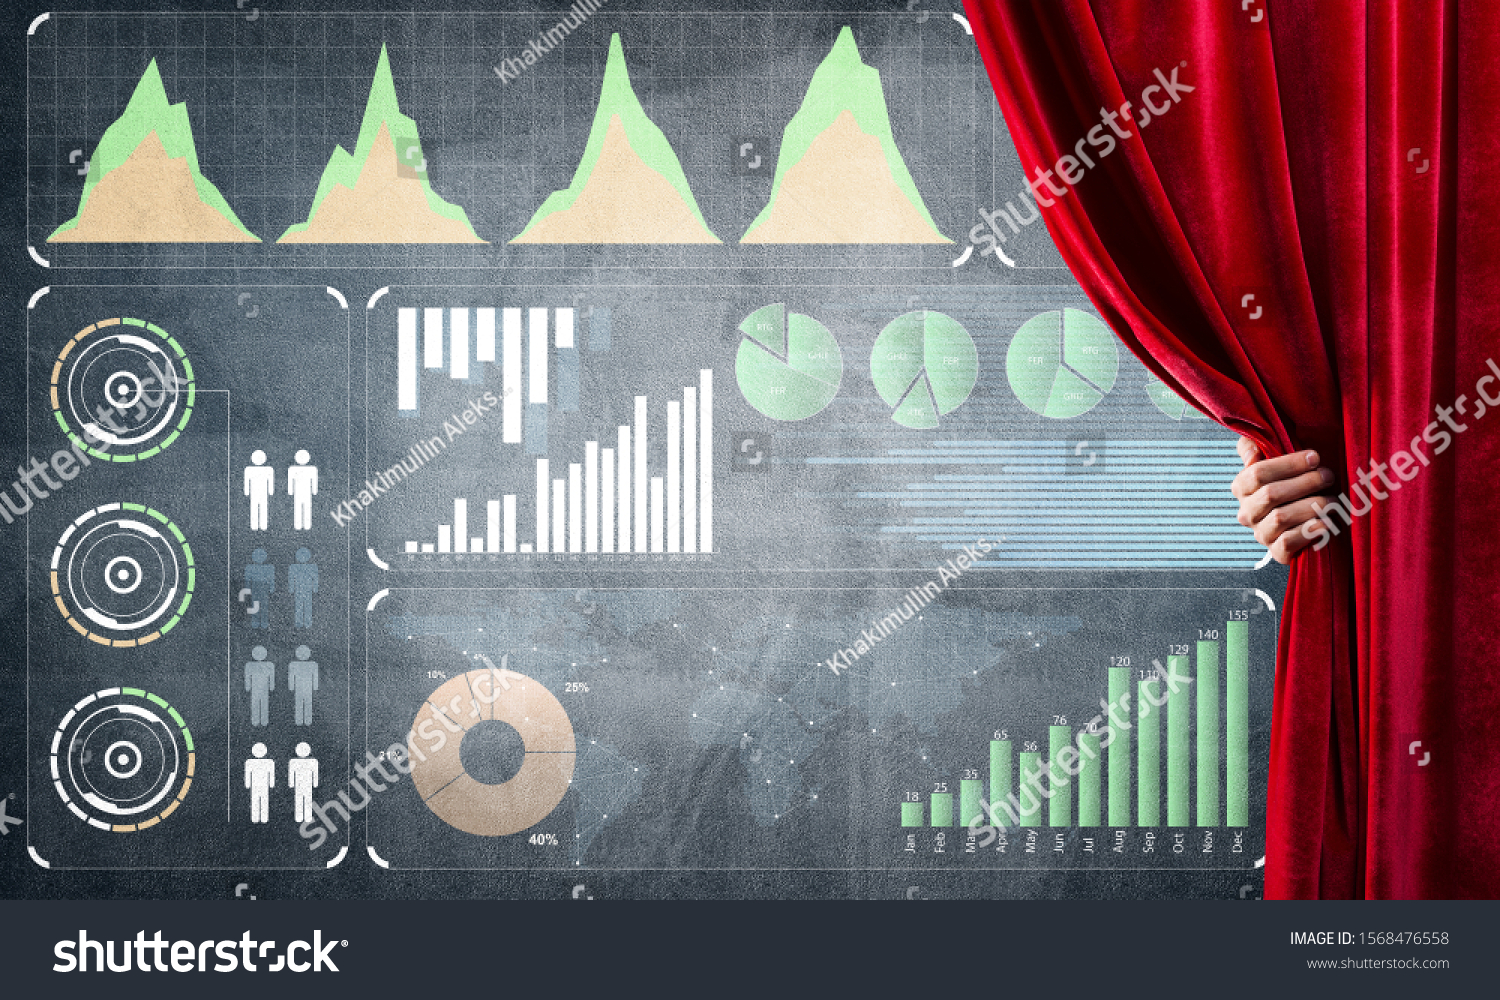 Hand opening red curtain and drawing business graphs and diagrams behind it #1568476558